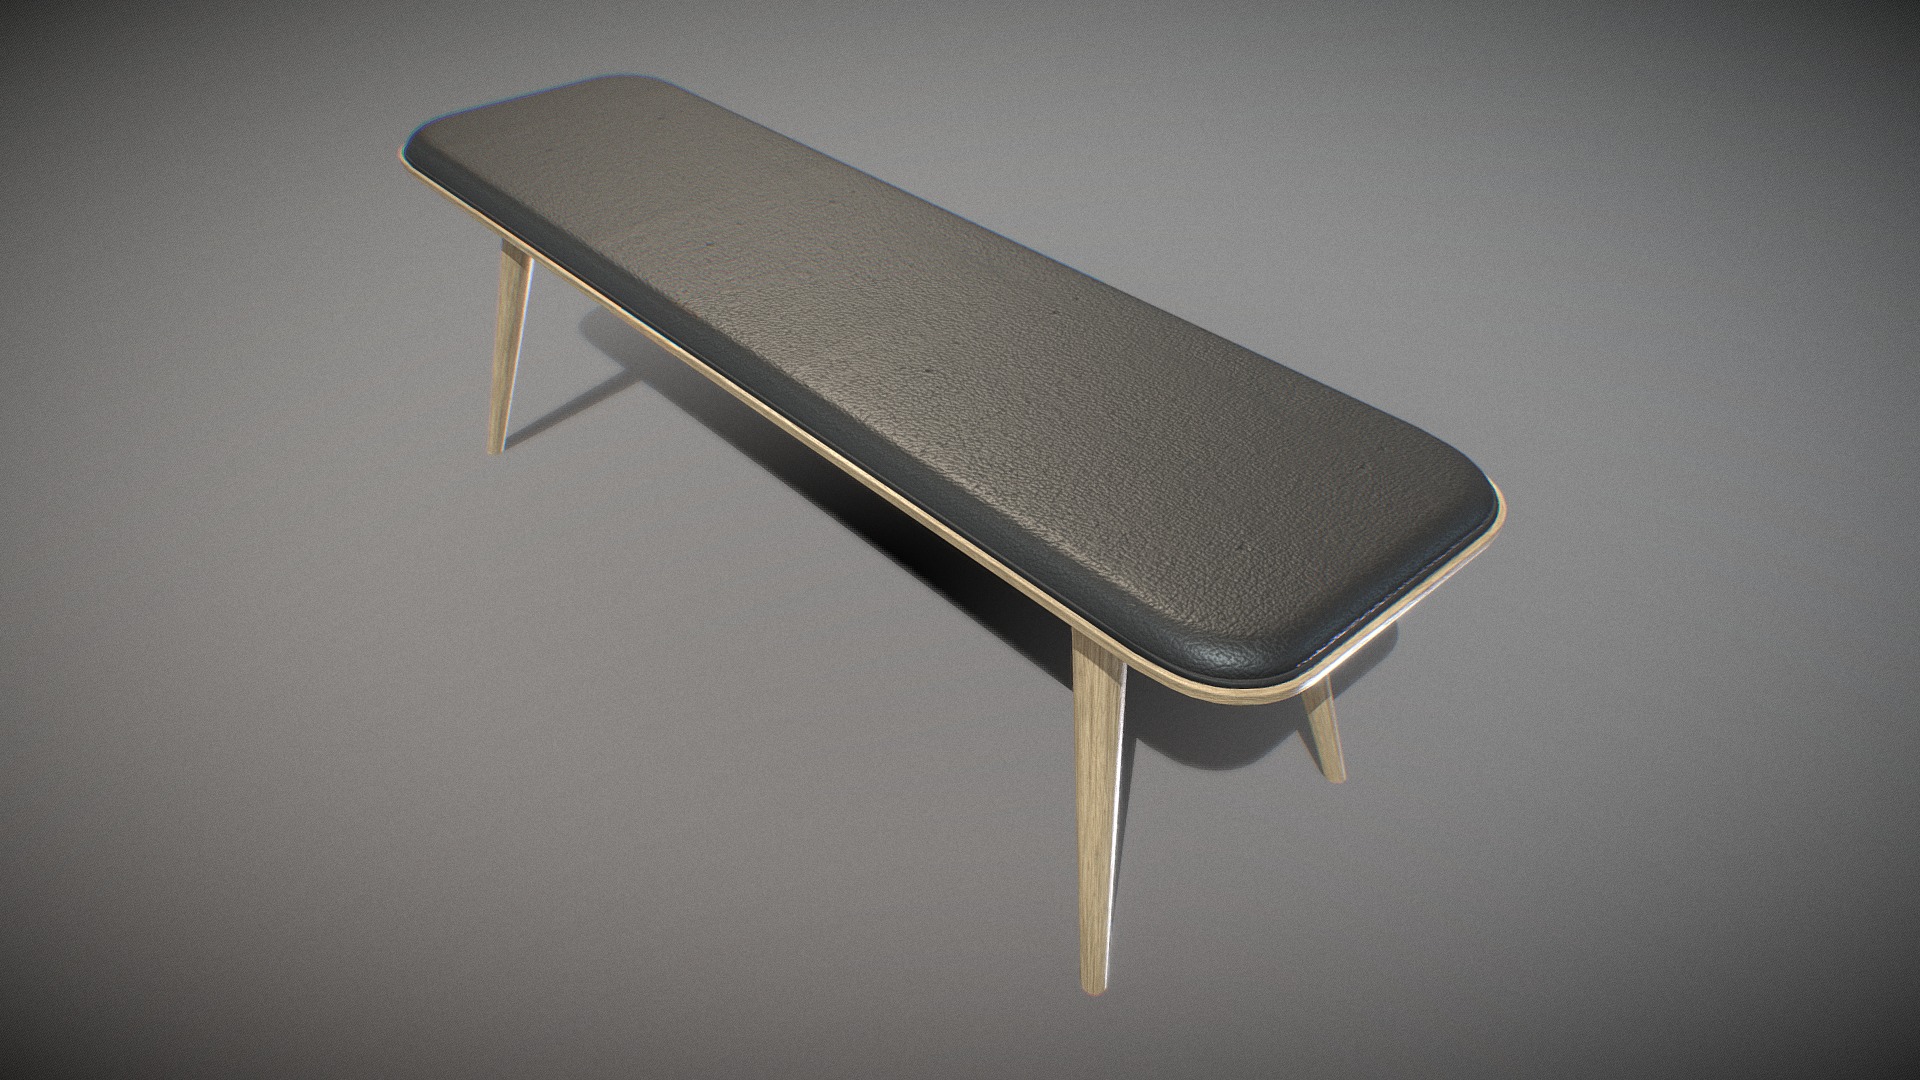 3D model Spine Wood Base Bench-oak standard lacquered - This is a 3D model of the Spine Wood Base Bench-oak standard lacquered. The 3D model is about a metal chair with a metal frame.